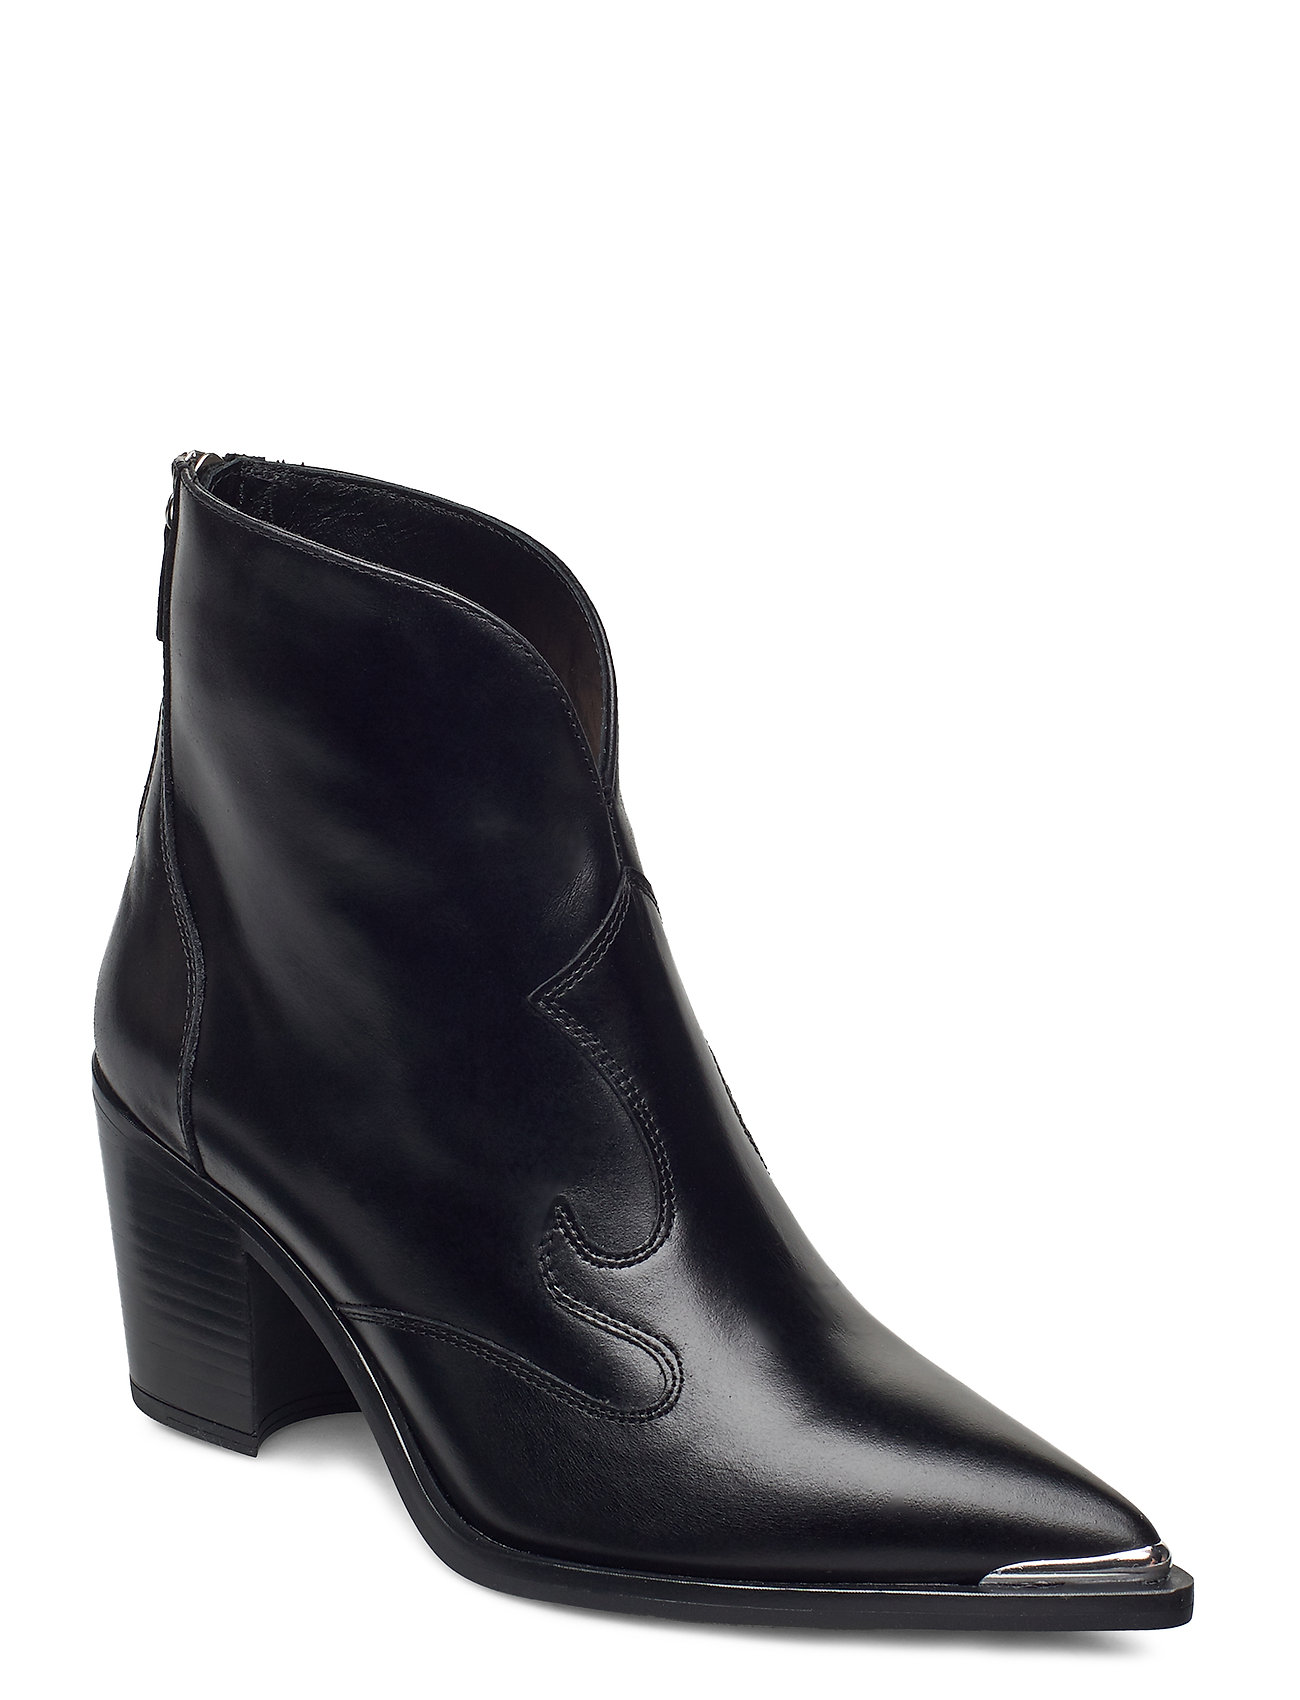 Marcel_ne Shoes Boots Ankle Boots Ankle Boot - Heel Musta UNISA